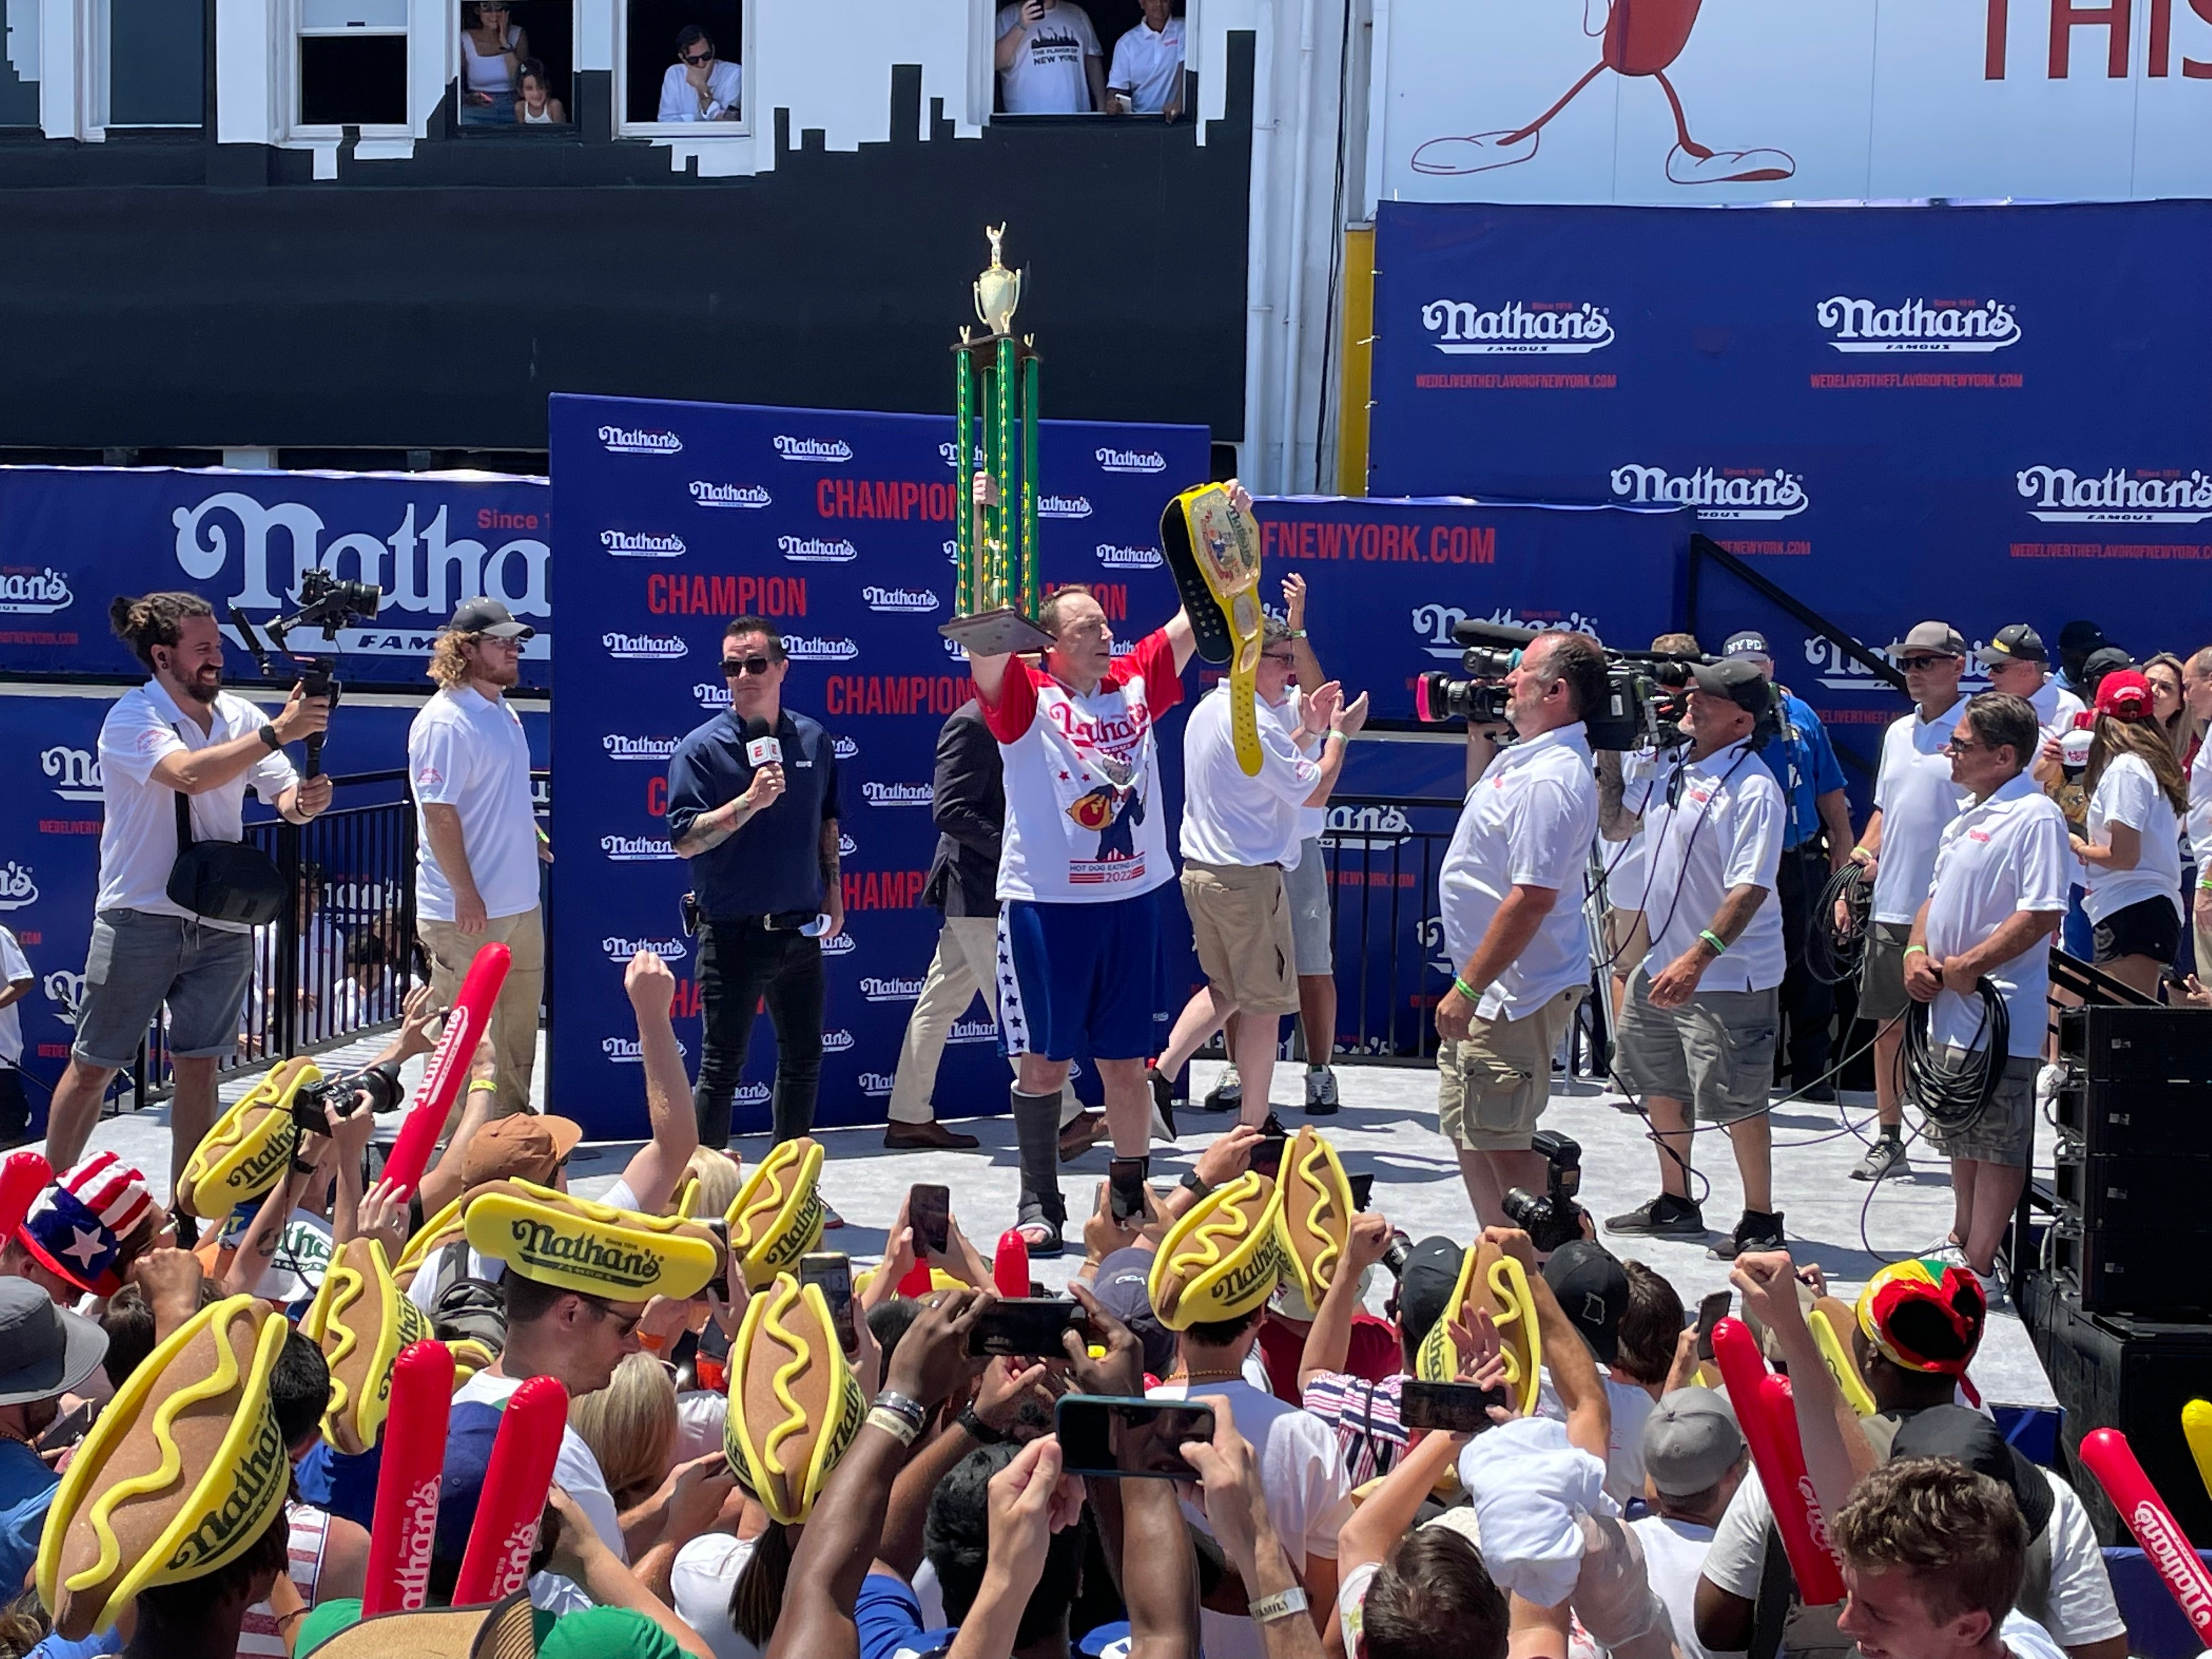 Joey Chestnut downs 63 hot dogs, wins Nathan's Famous contest for 15th time - Fox News : Competitive eating phenom Joey Chestnut captured his 15th title on Monday, July 4th, at Nathan’s Famous Hot Dog Eating Contest, an annual Independence Day tradition on Coney Island.  | Tranquility 國際社群